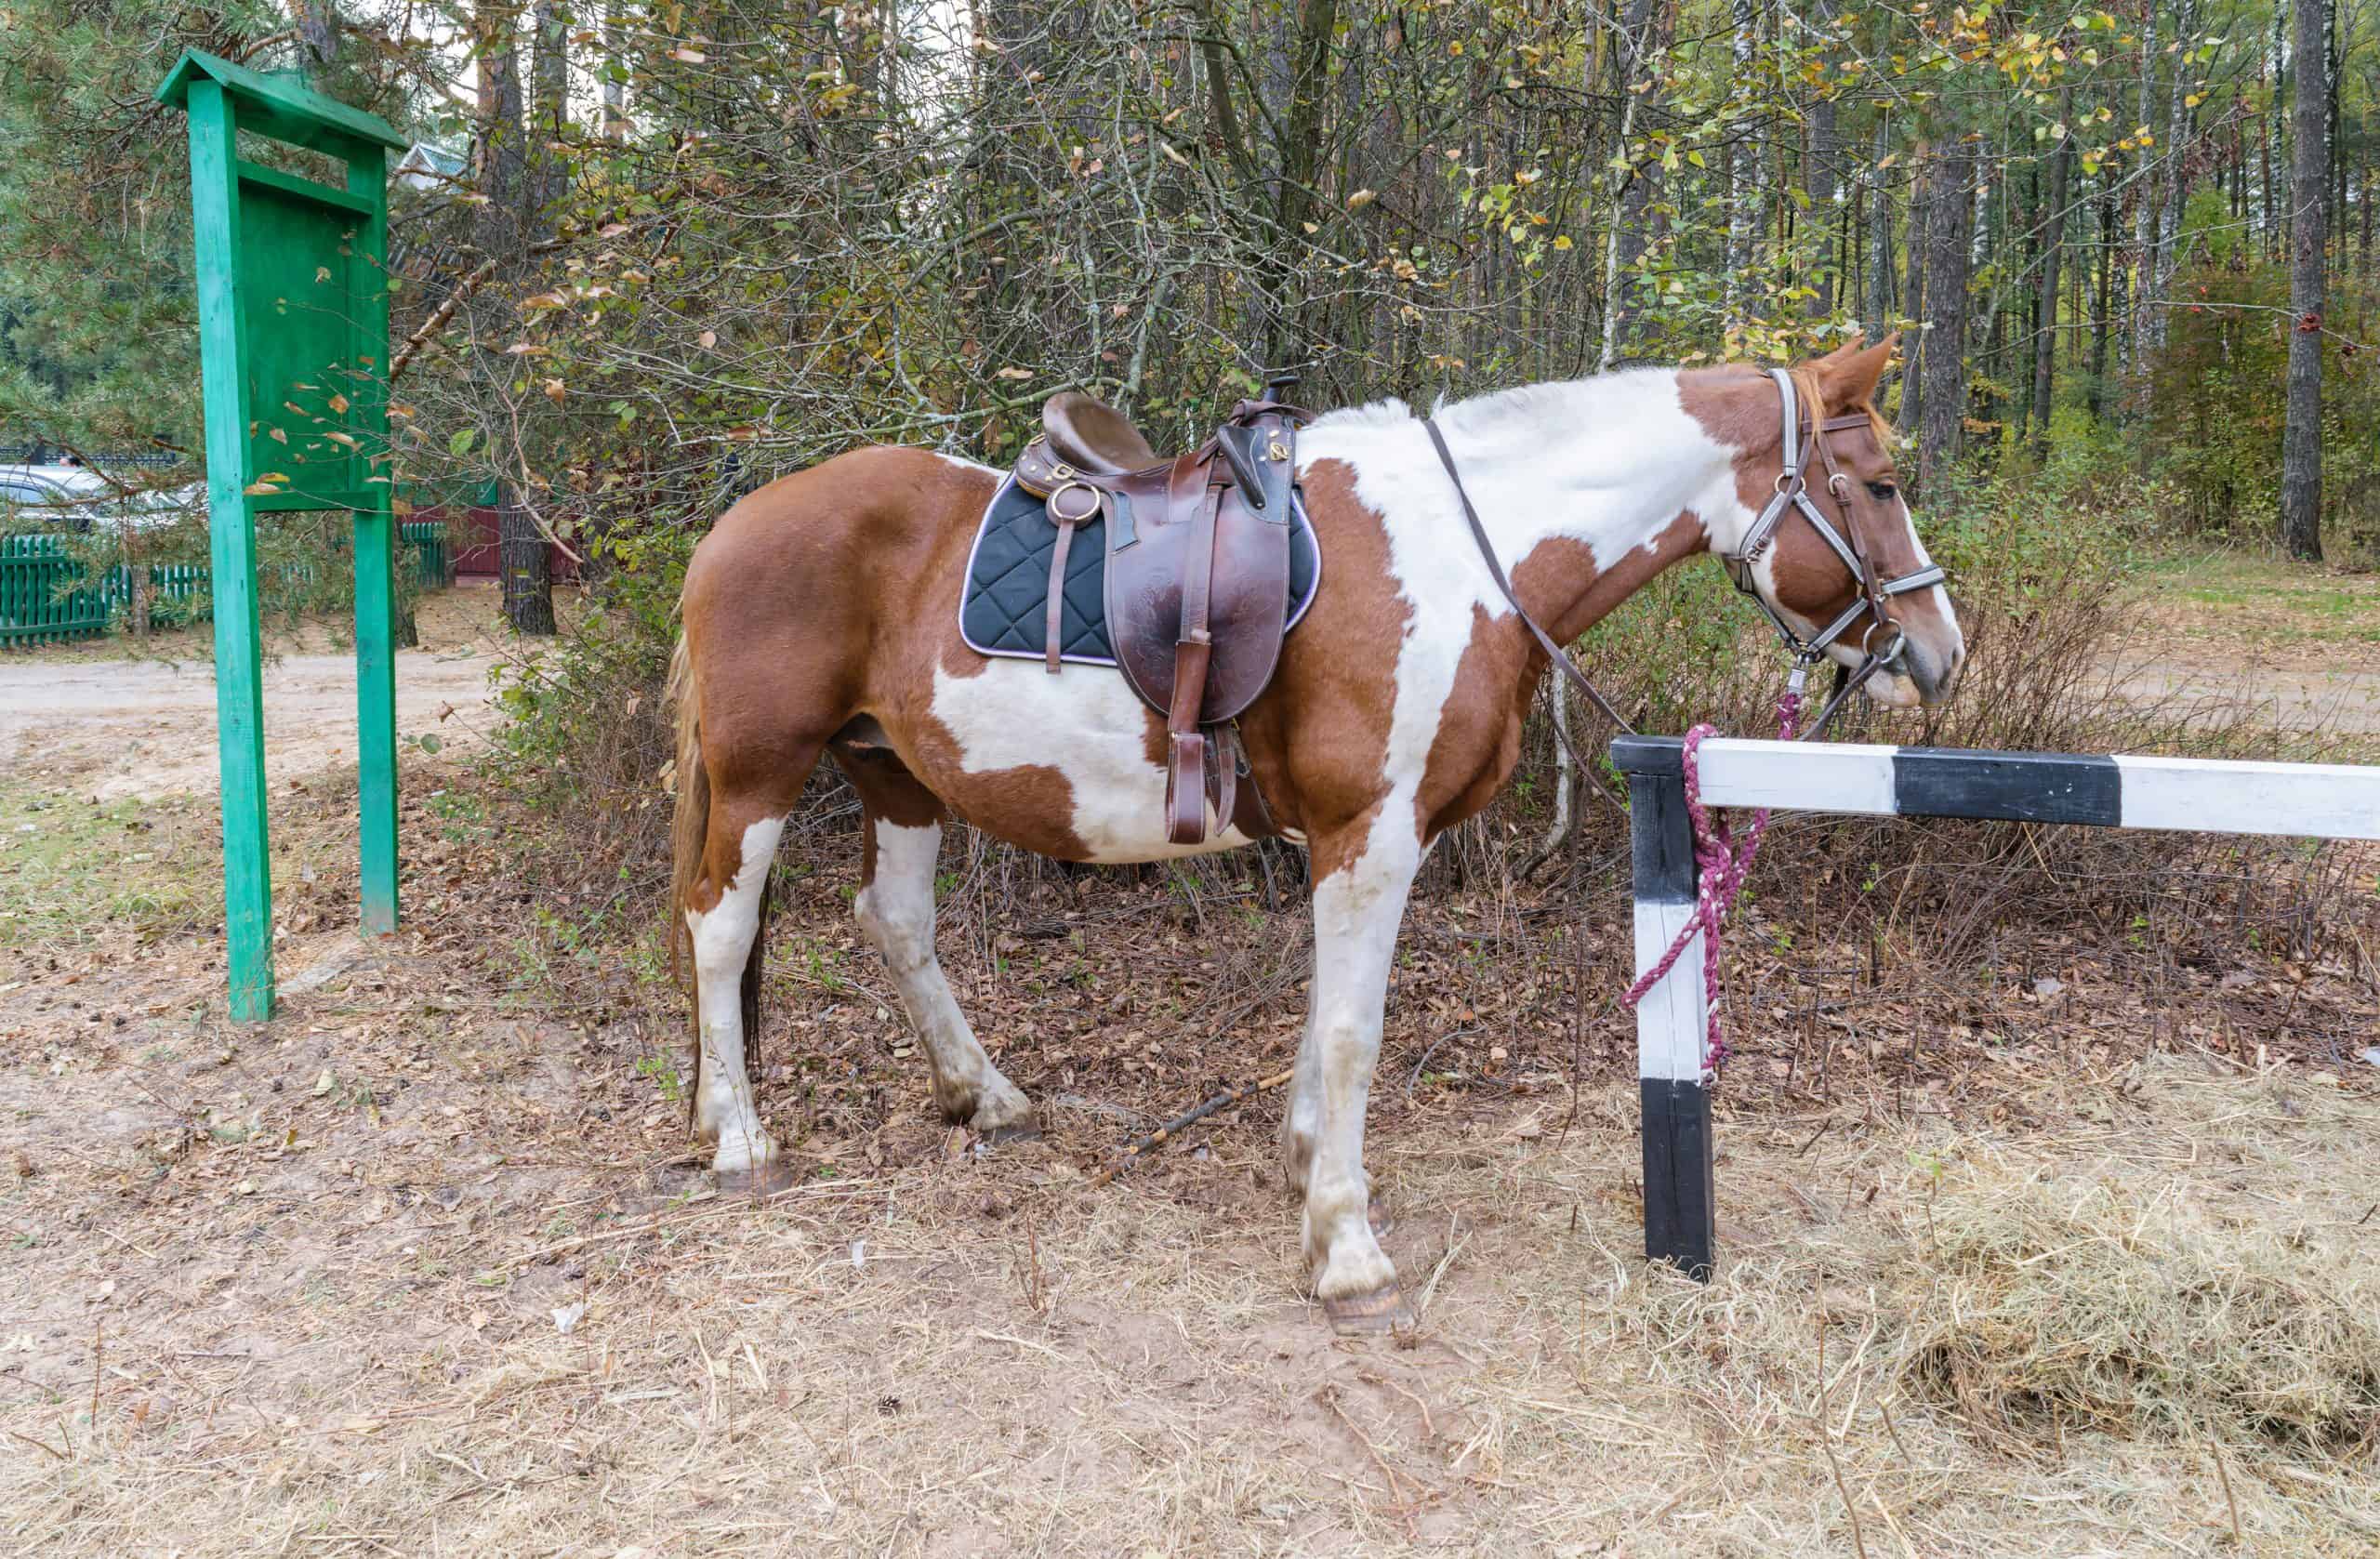 Red-white horse with a saddle and harness is on a leash